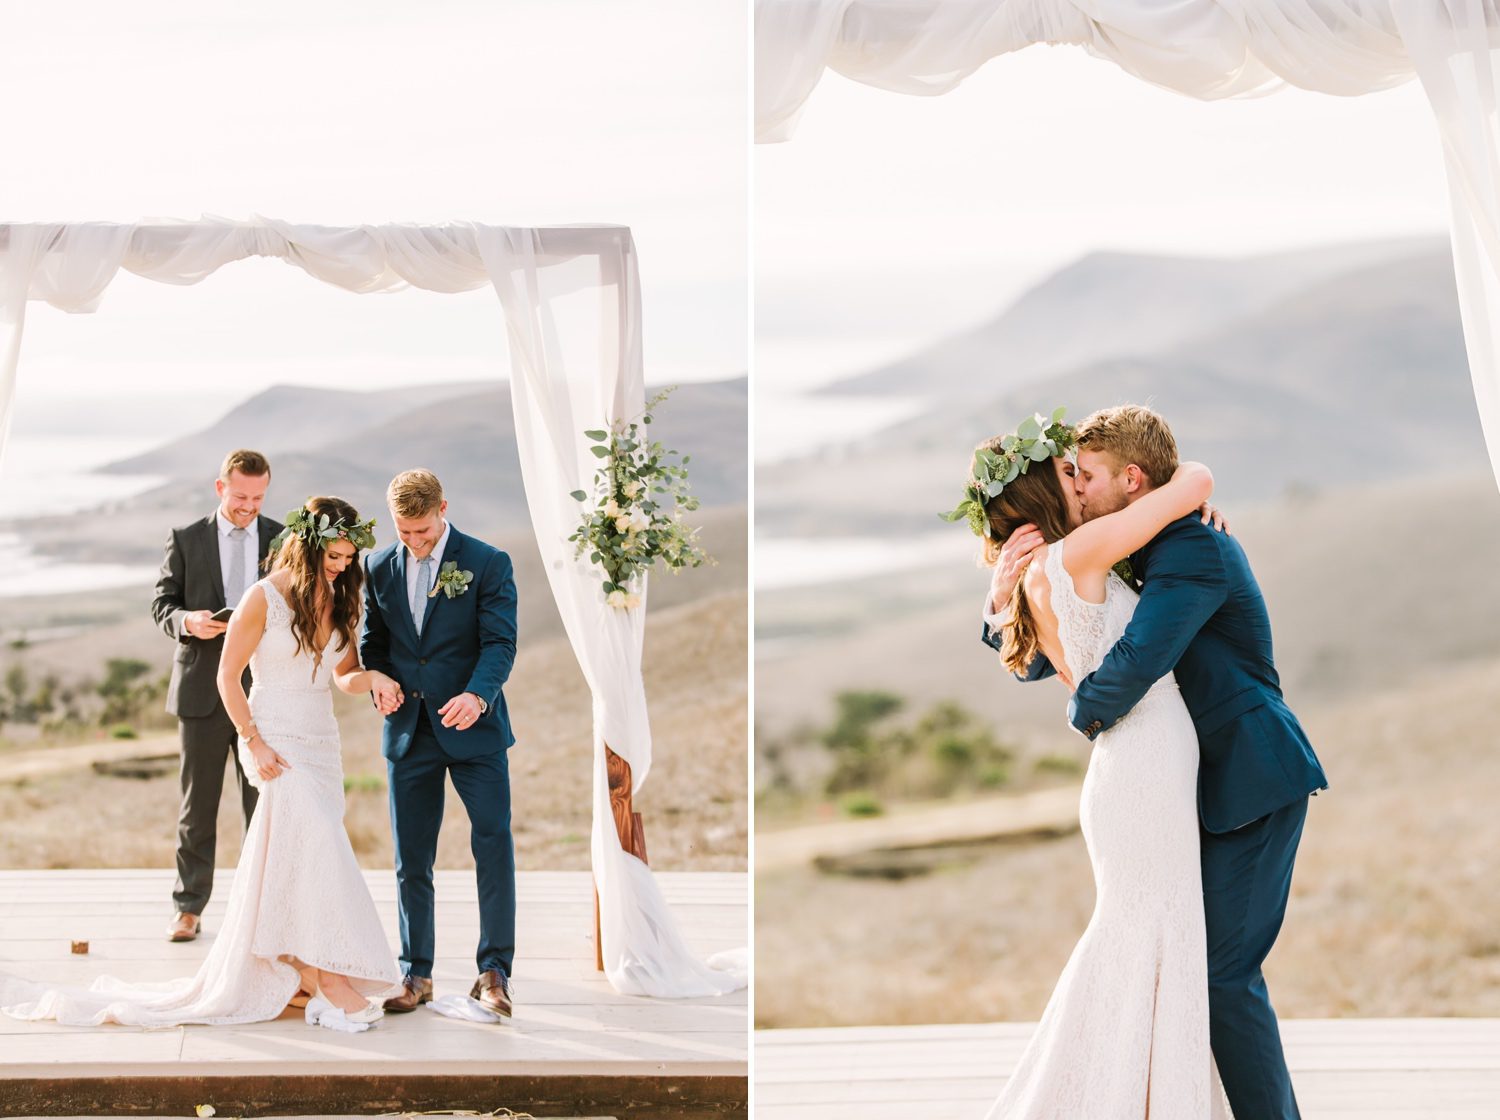 First kiss as husband and wife at California Wedding